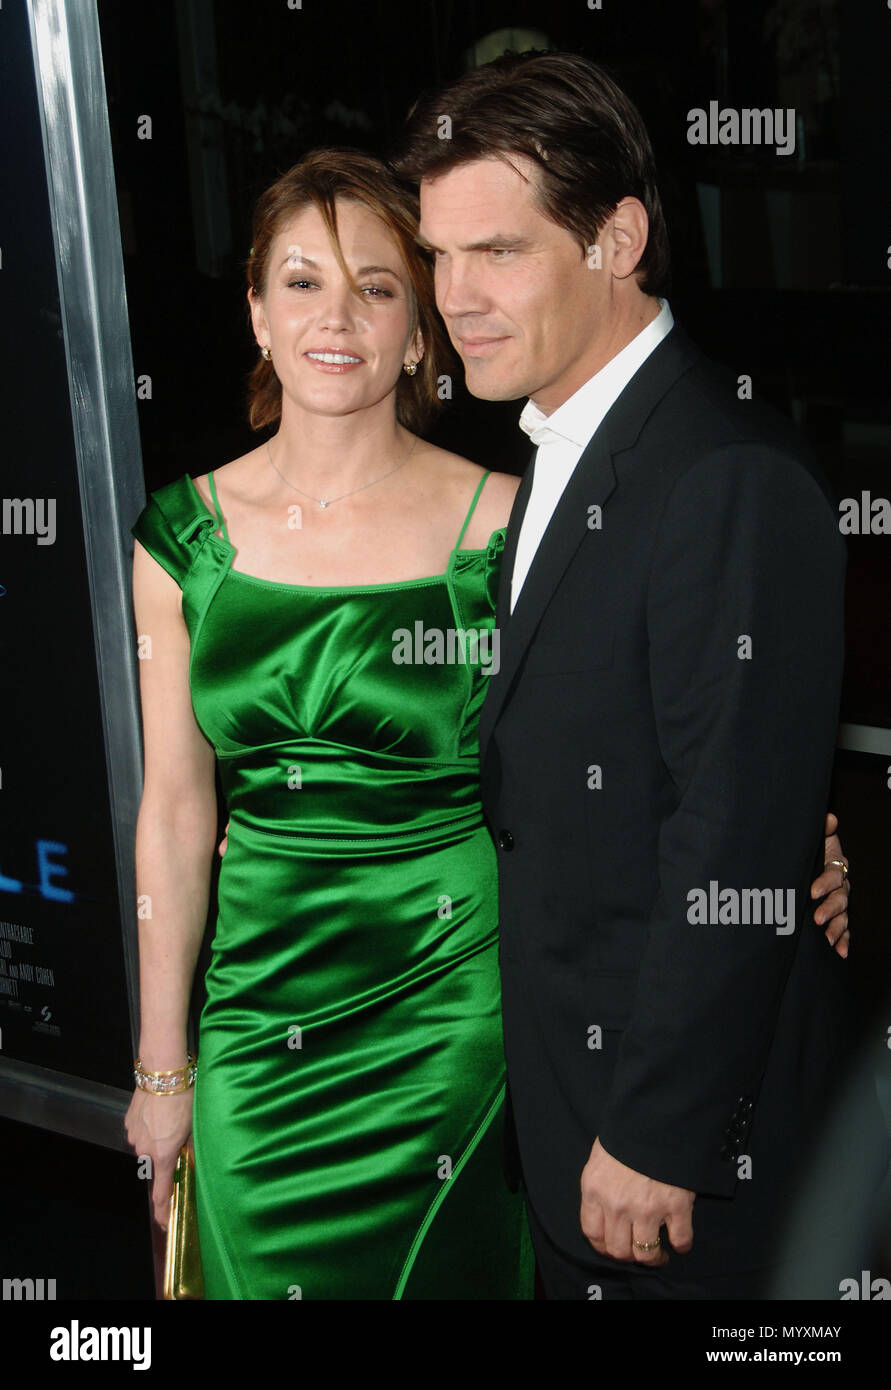 Diane LANE  and husband Josh Brolin arriving at the UNTRACEABLE Premiere at the Silver Screen Theatre In Los Angeles.  Three quarters  LaneDiane BrolinJosh 39  Event in Hollywood Life - California, Red Carpet Event, USA, Film Industry, Celebrities, Photography, Bestof, Arts Culture and Entertainment, Celebrities fashion, Best of, Hollywood Life, Event in Hollywood Life - California, Red Carpet and backstage, Music celebrities, Topix, Couple, family ( husband and wife ) and kids- Children, brothers and sisters inquiry tsuni@Gamma-USA.com, Credit Tsuni / USA, 2006 to 2009 Stock Photo